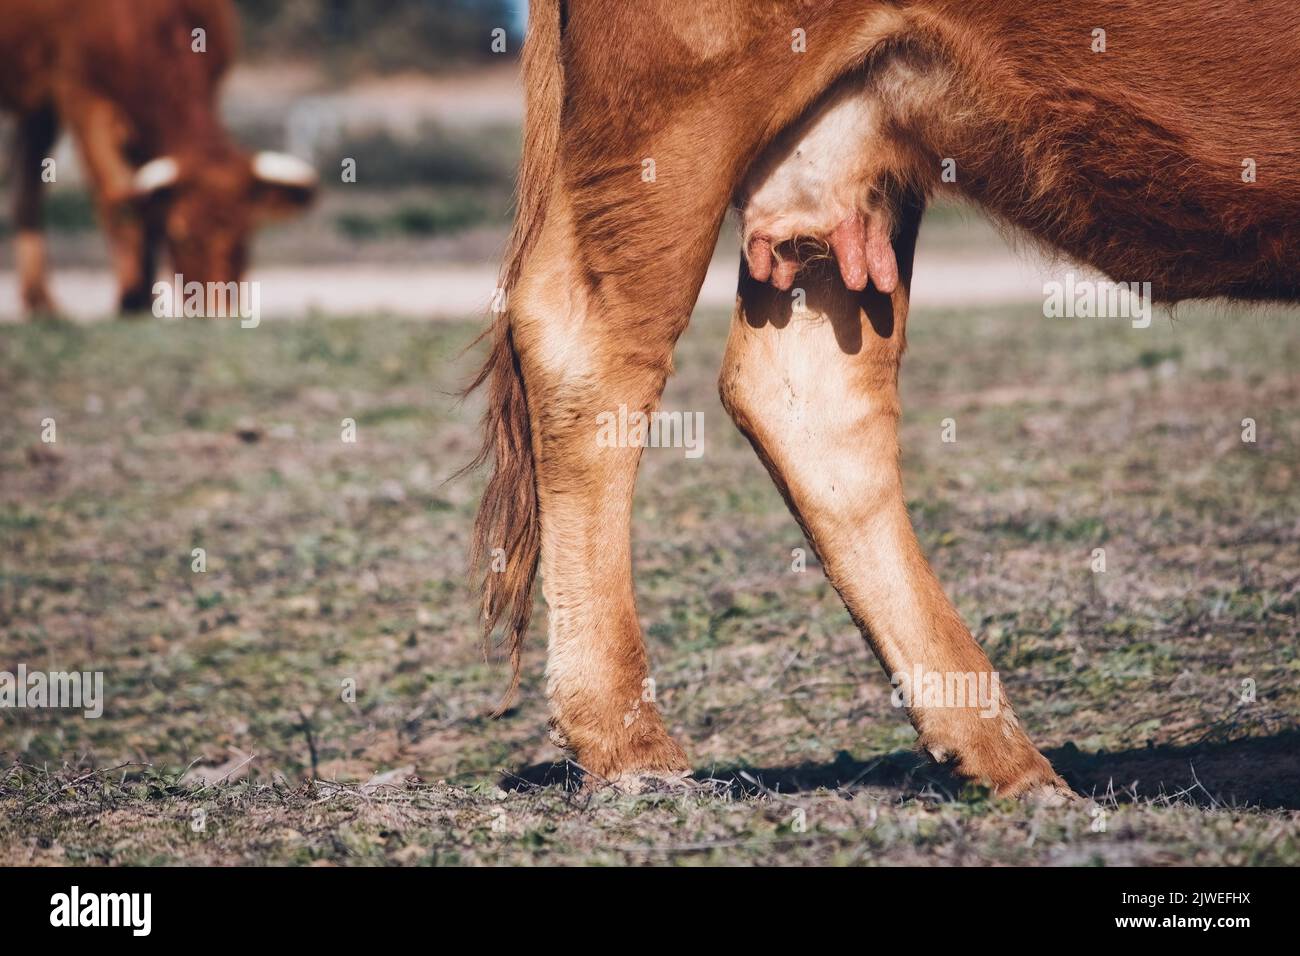 Selective focus close-up of udders of a brown cow in an agricultural field on a farm Stock Photo